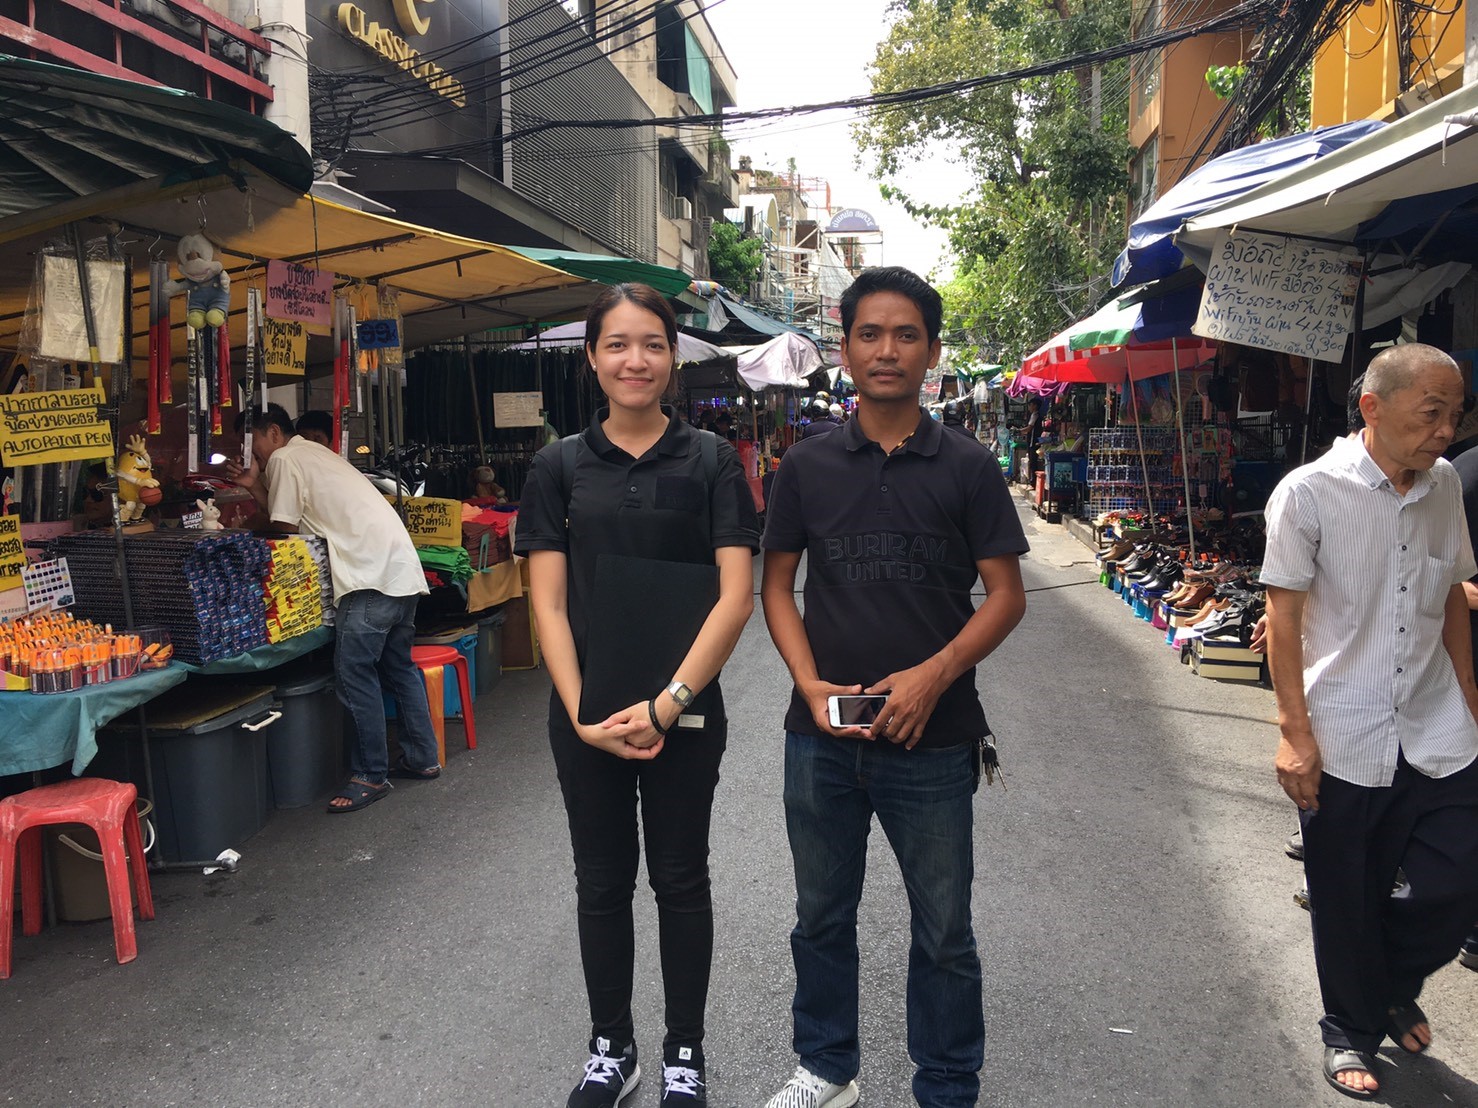 26th September 2017 Inspections at Baan Mo Market and The Old Siam Plaza The DIP Inspected Baan Mo Market  and The Old Siam Plaza